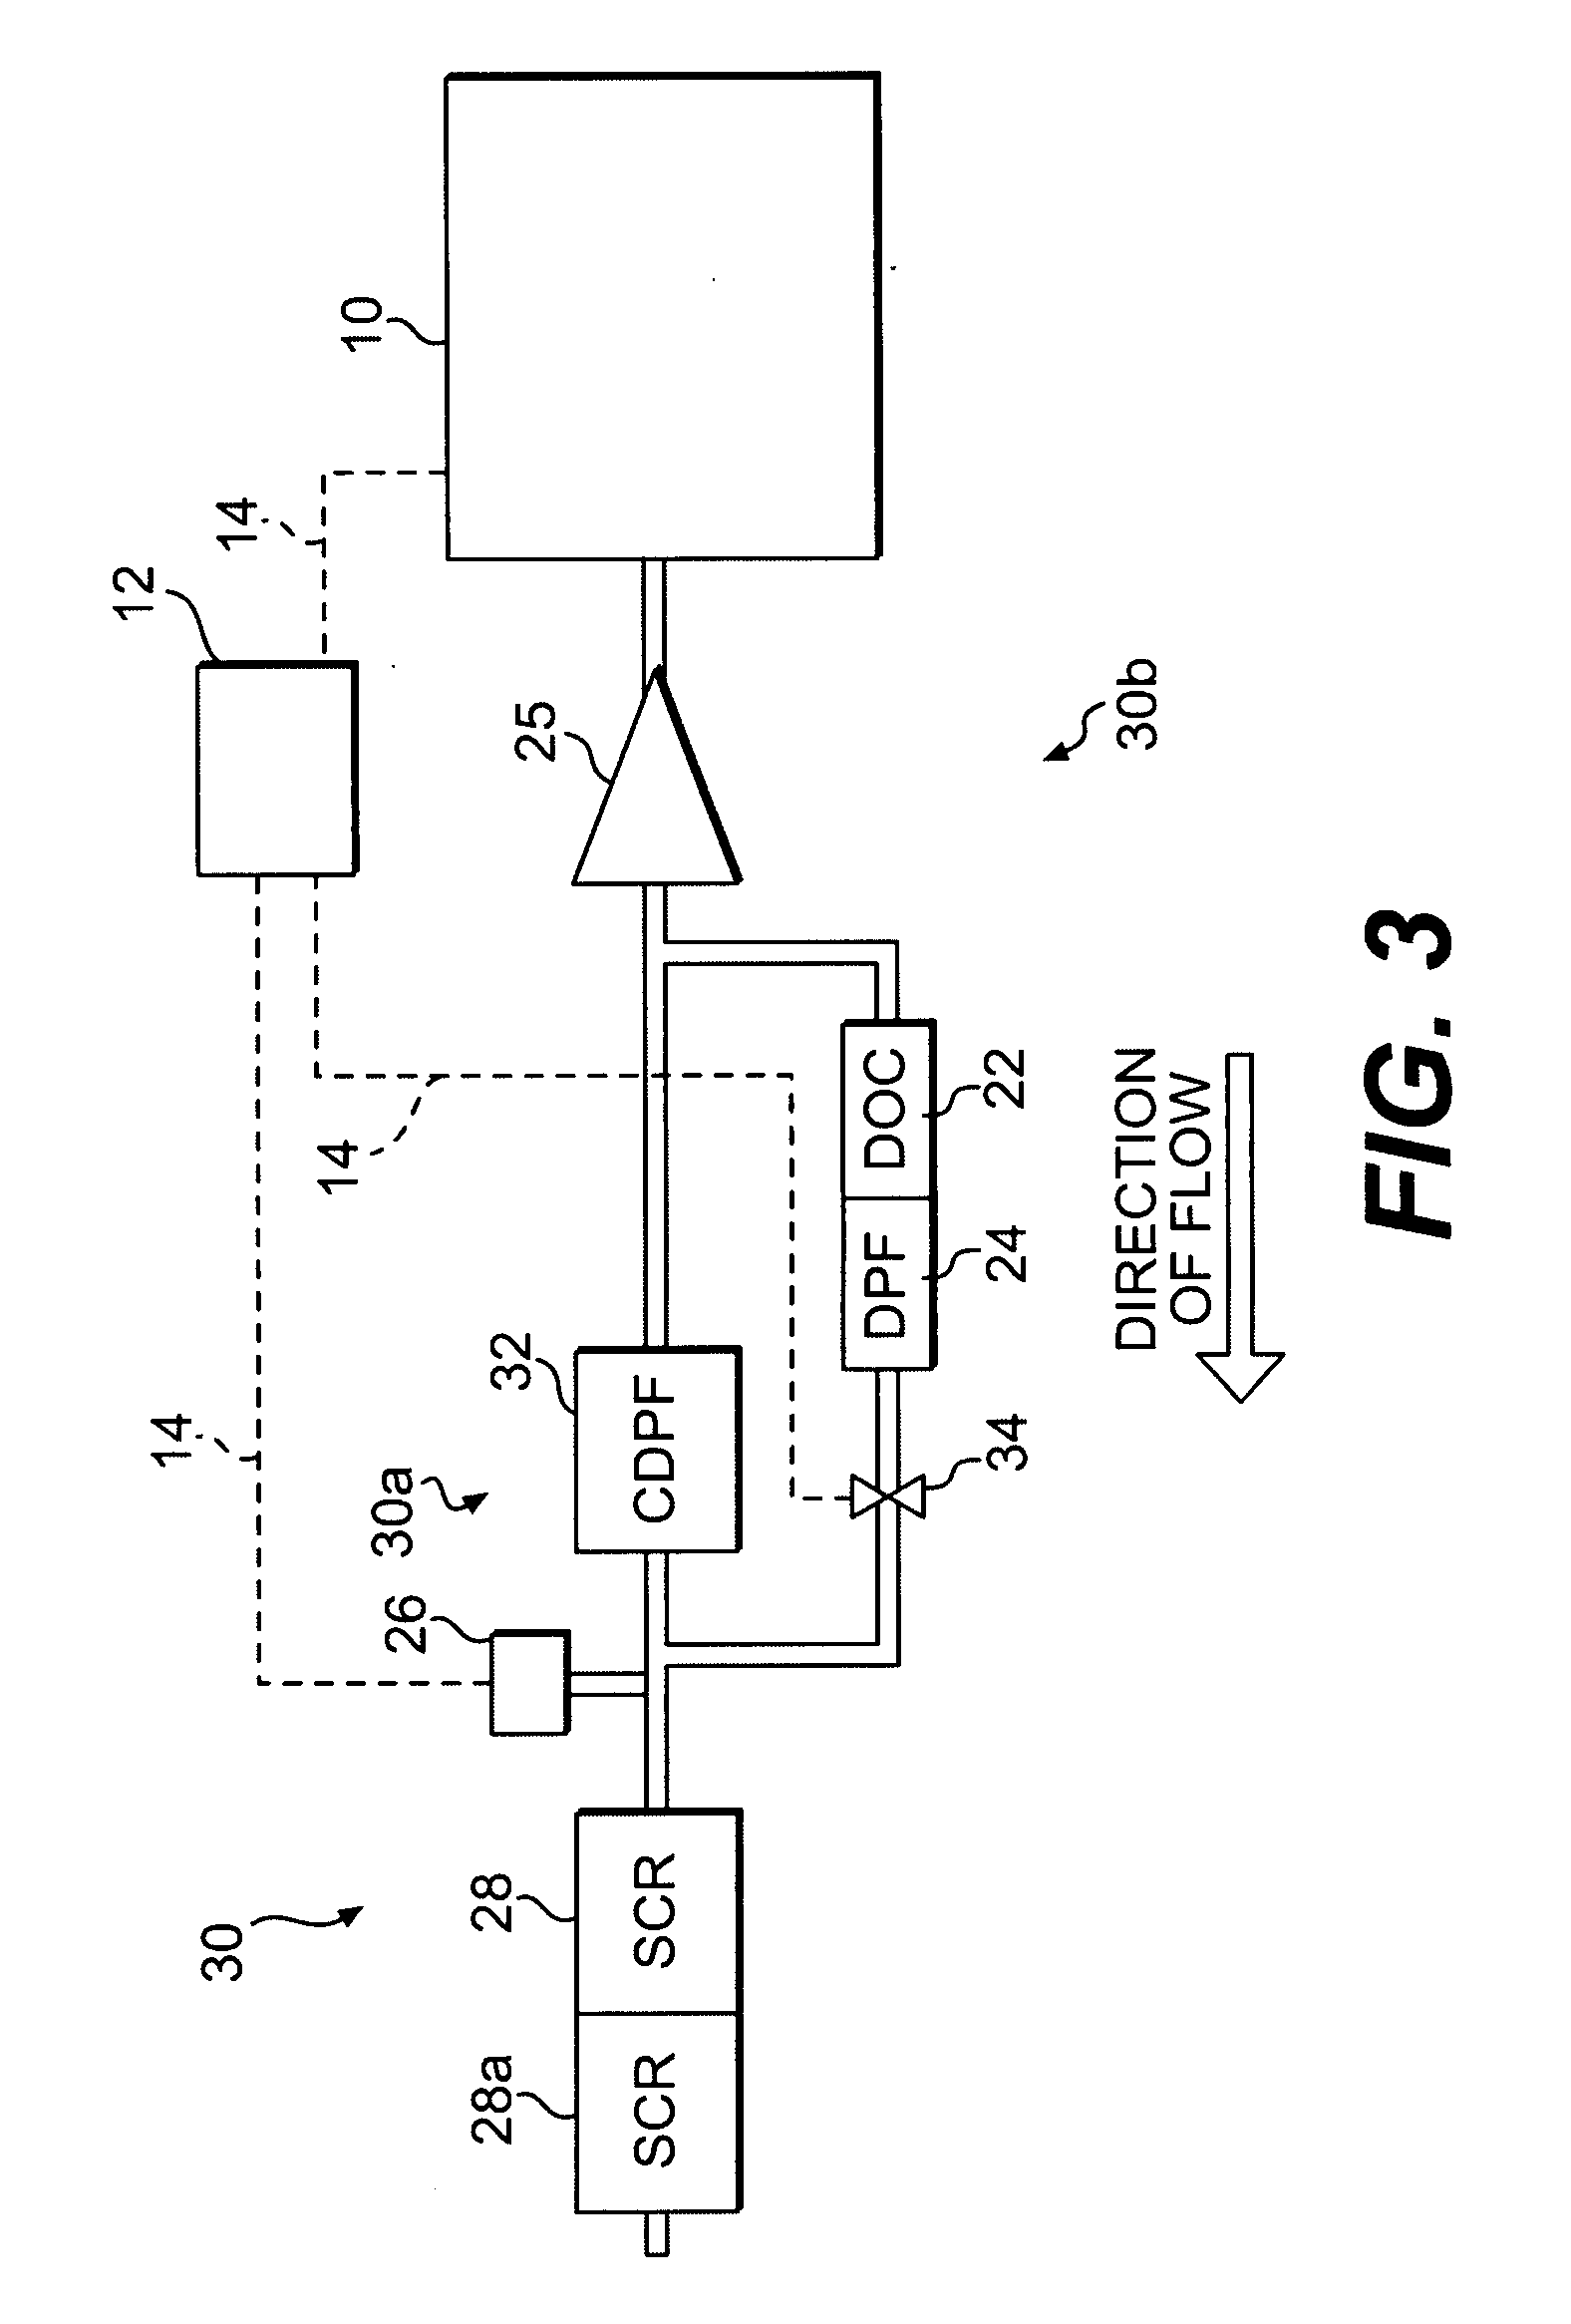 Exhaust treatment system with an oxidation device for NO2 control